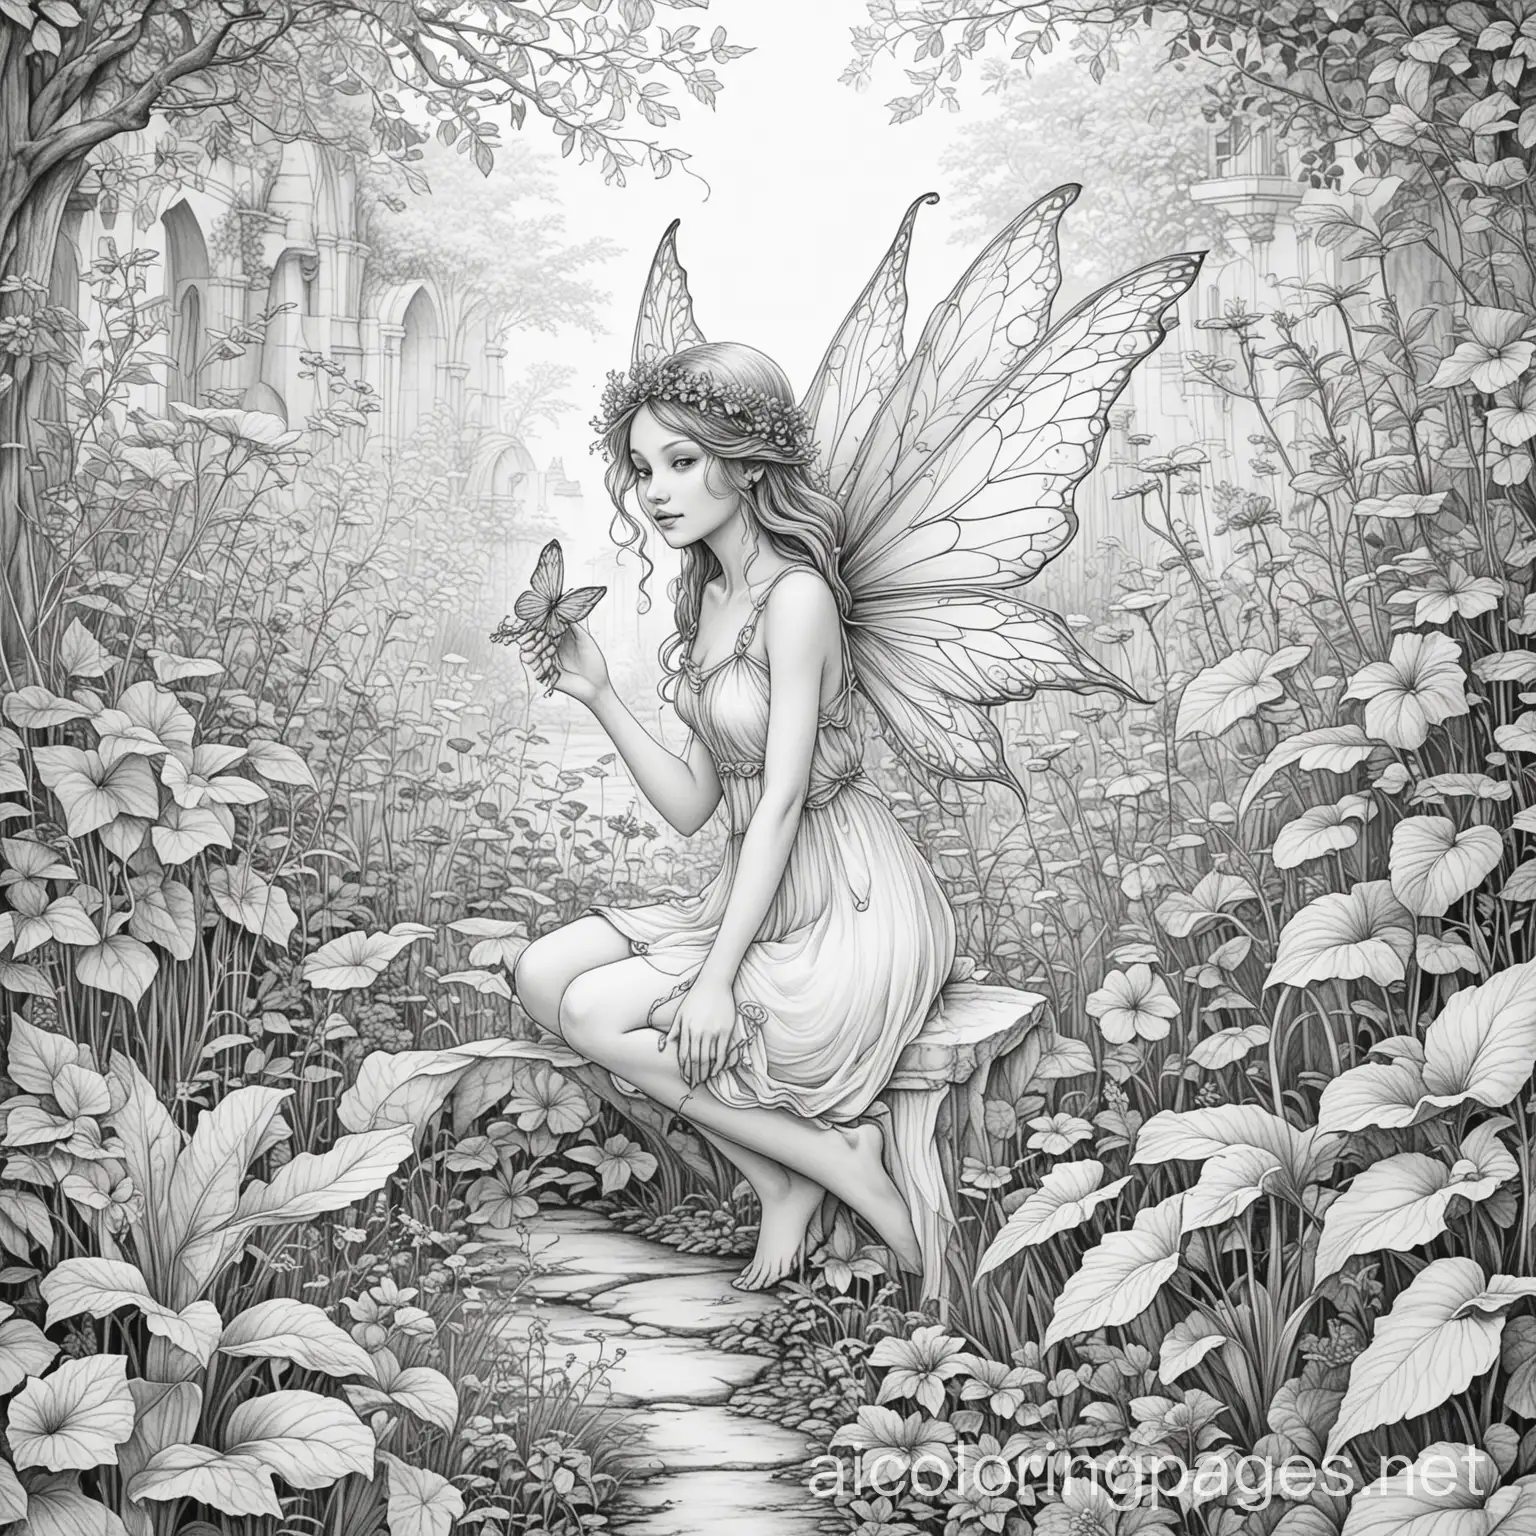 a single fairy in a secret garden
, Coloring Page, black and white, line art, white background, Simplicity, Ample White Space. The background of the coloring page is plain white to make it easy for young children to color within the lines. The outlines of all the subjects are easy to distinguish, making it simple for kids to color without too much difficulty